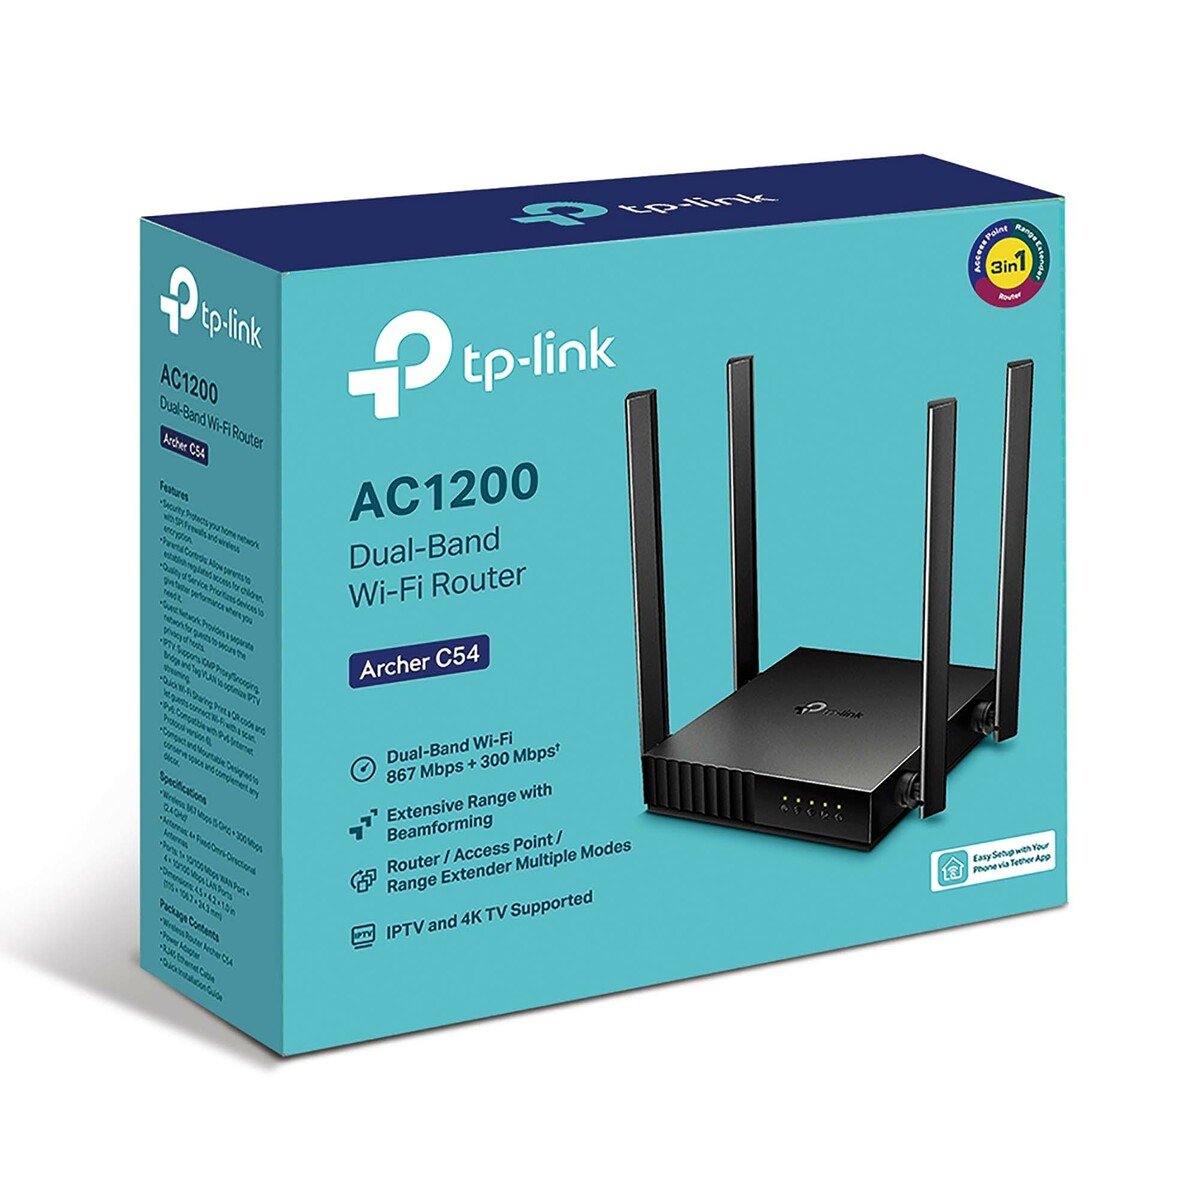 TP- Link AC1200 Dual-Band Wi-Fi Router Archer C54